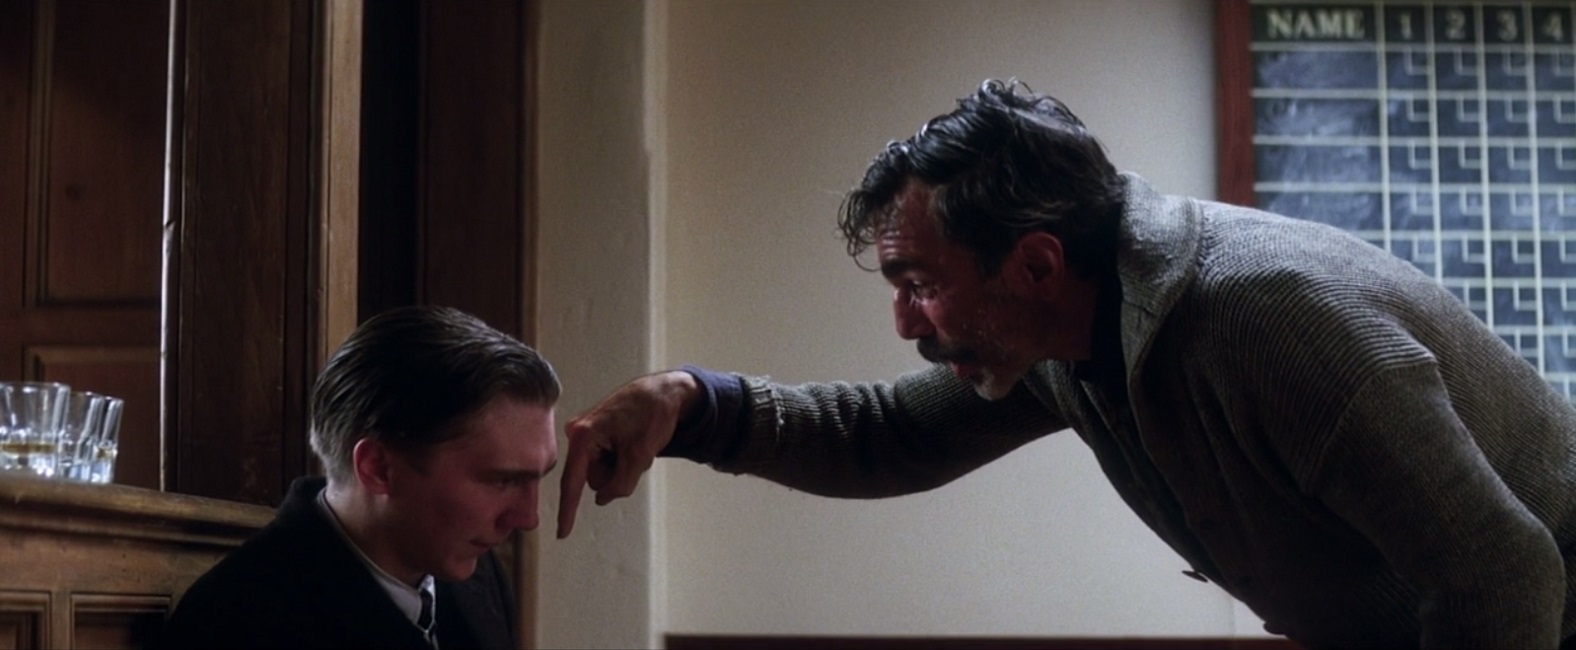 Daniel Day-Lewis & Paul Dano in There Will Be Blood